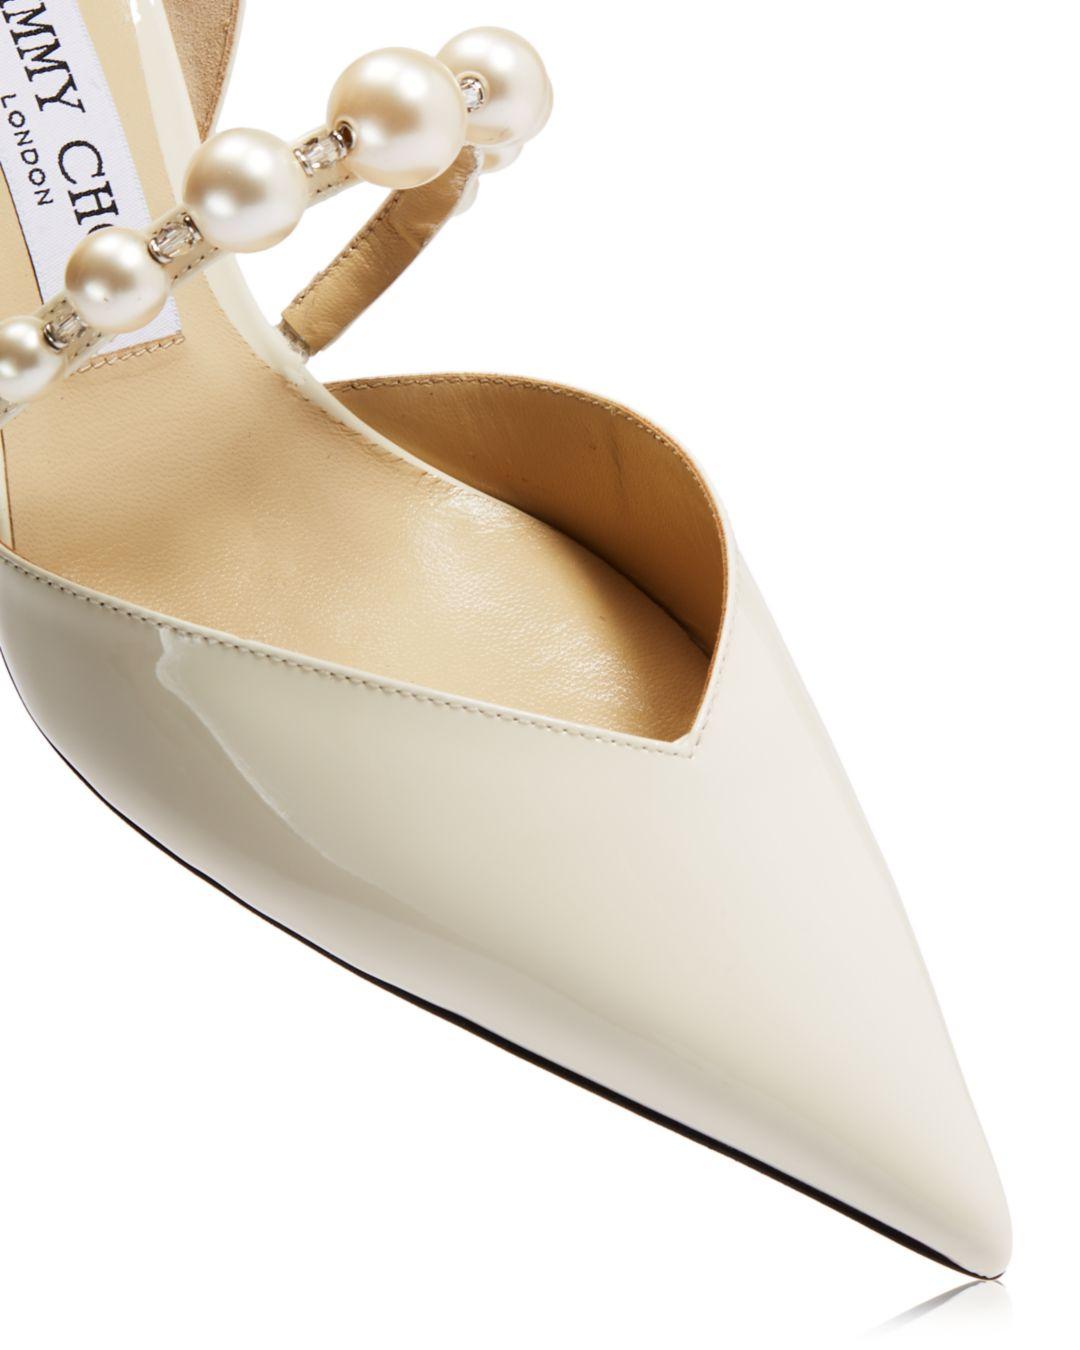 Jimmy Choo Leather Aurelie 65 D'orsay Pumps in White - Lyst